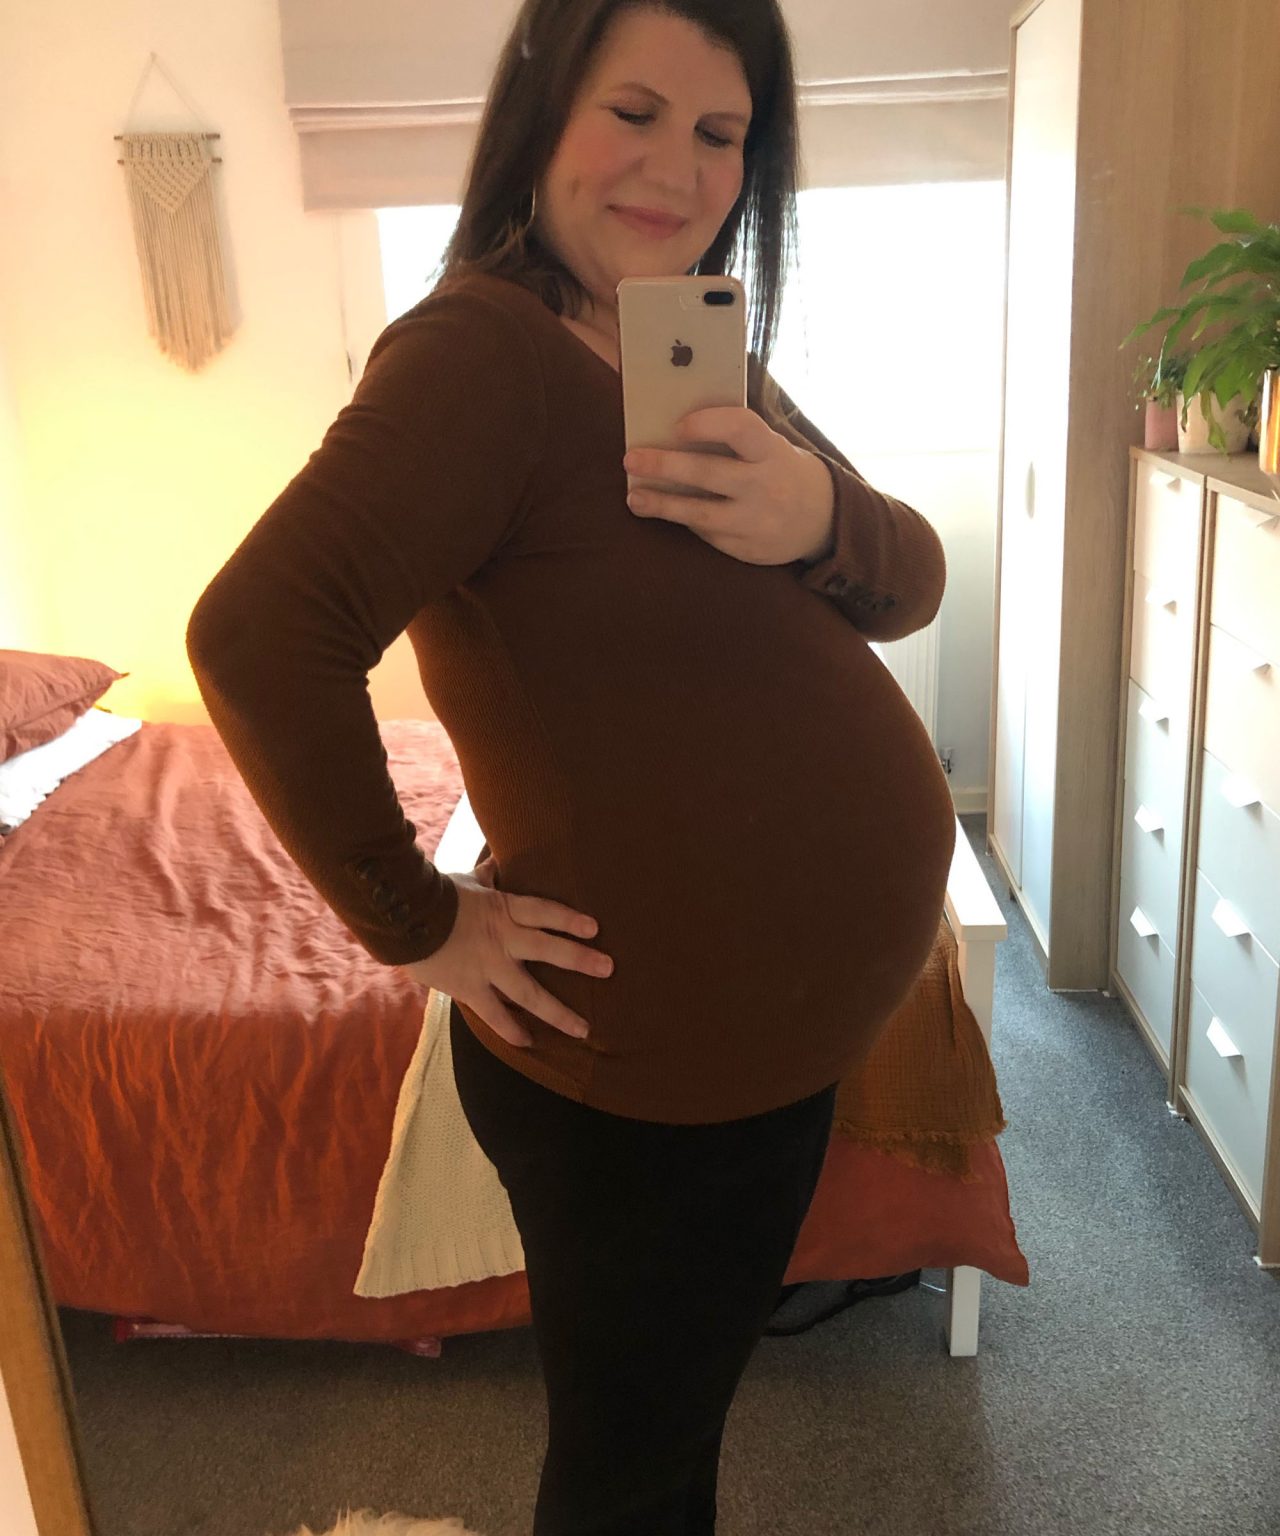 A Pregnancy Update: Why we have a large age gap, getting pregnant after